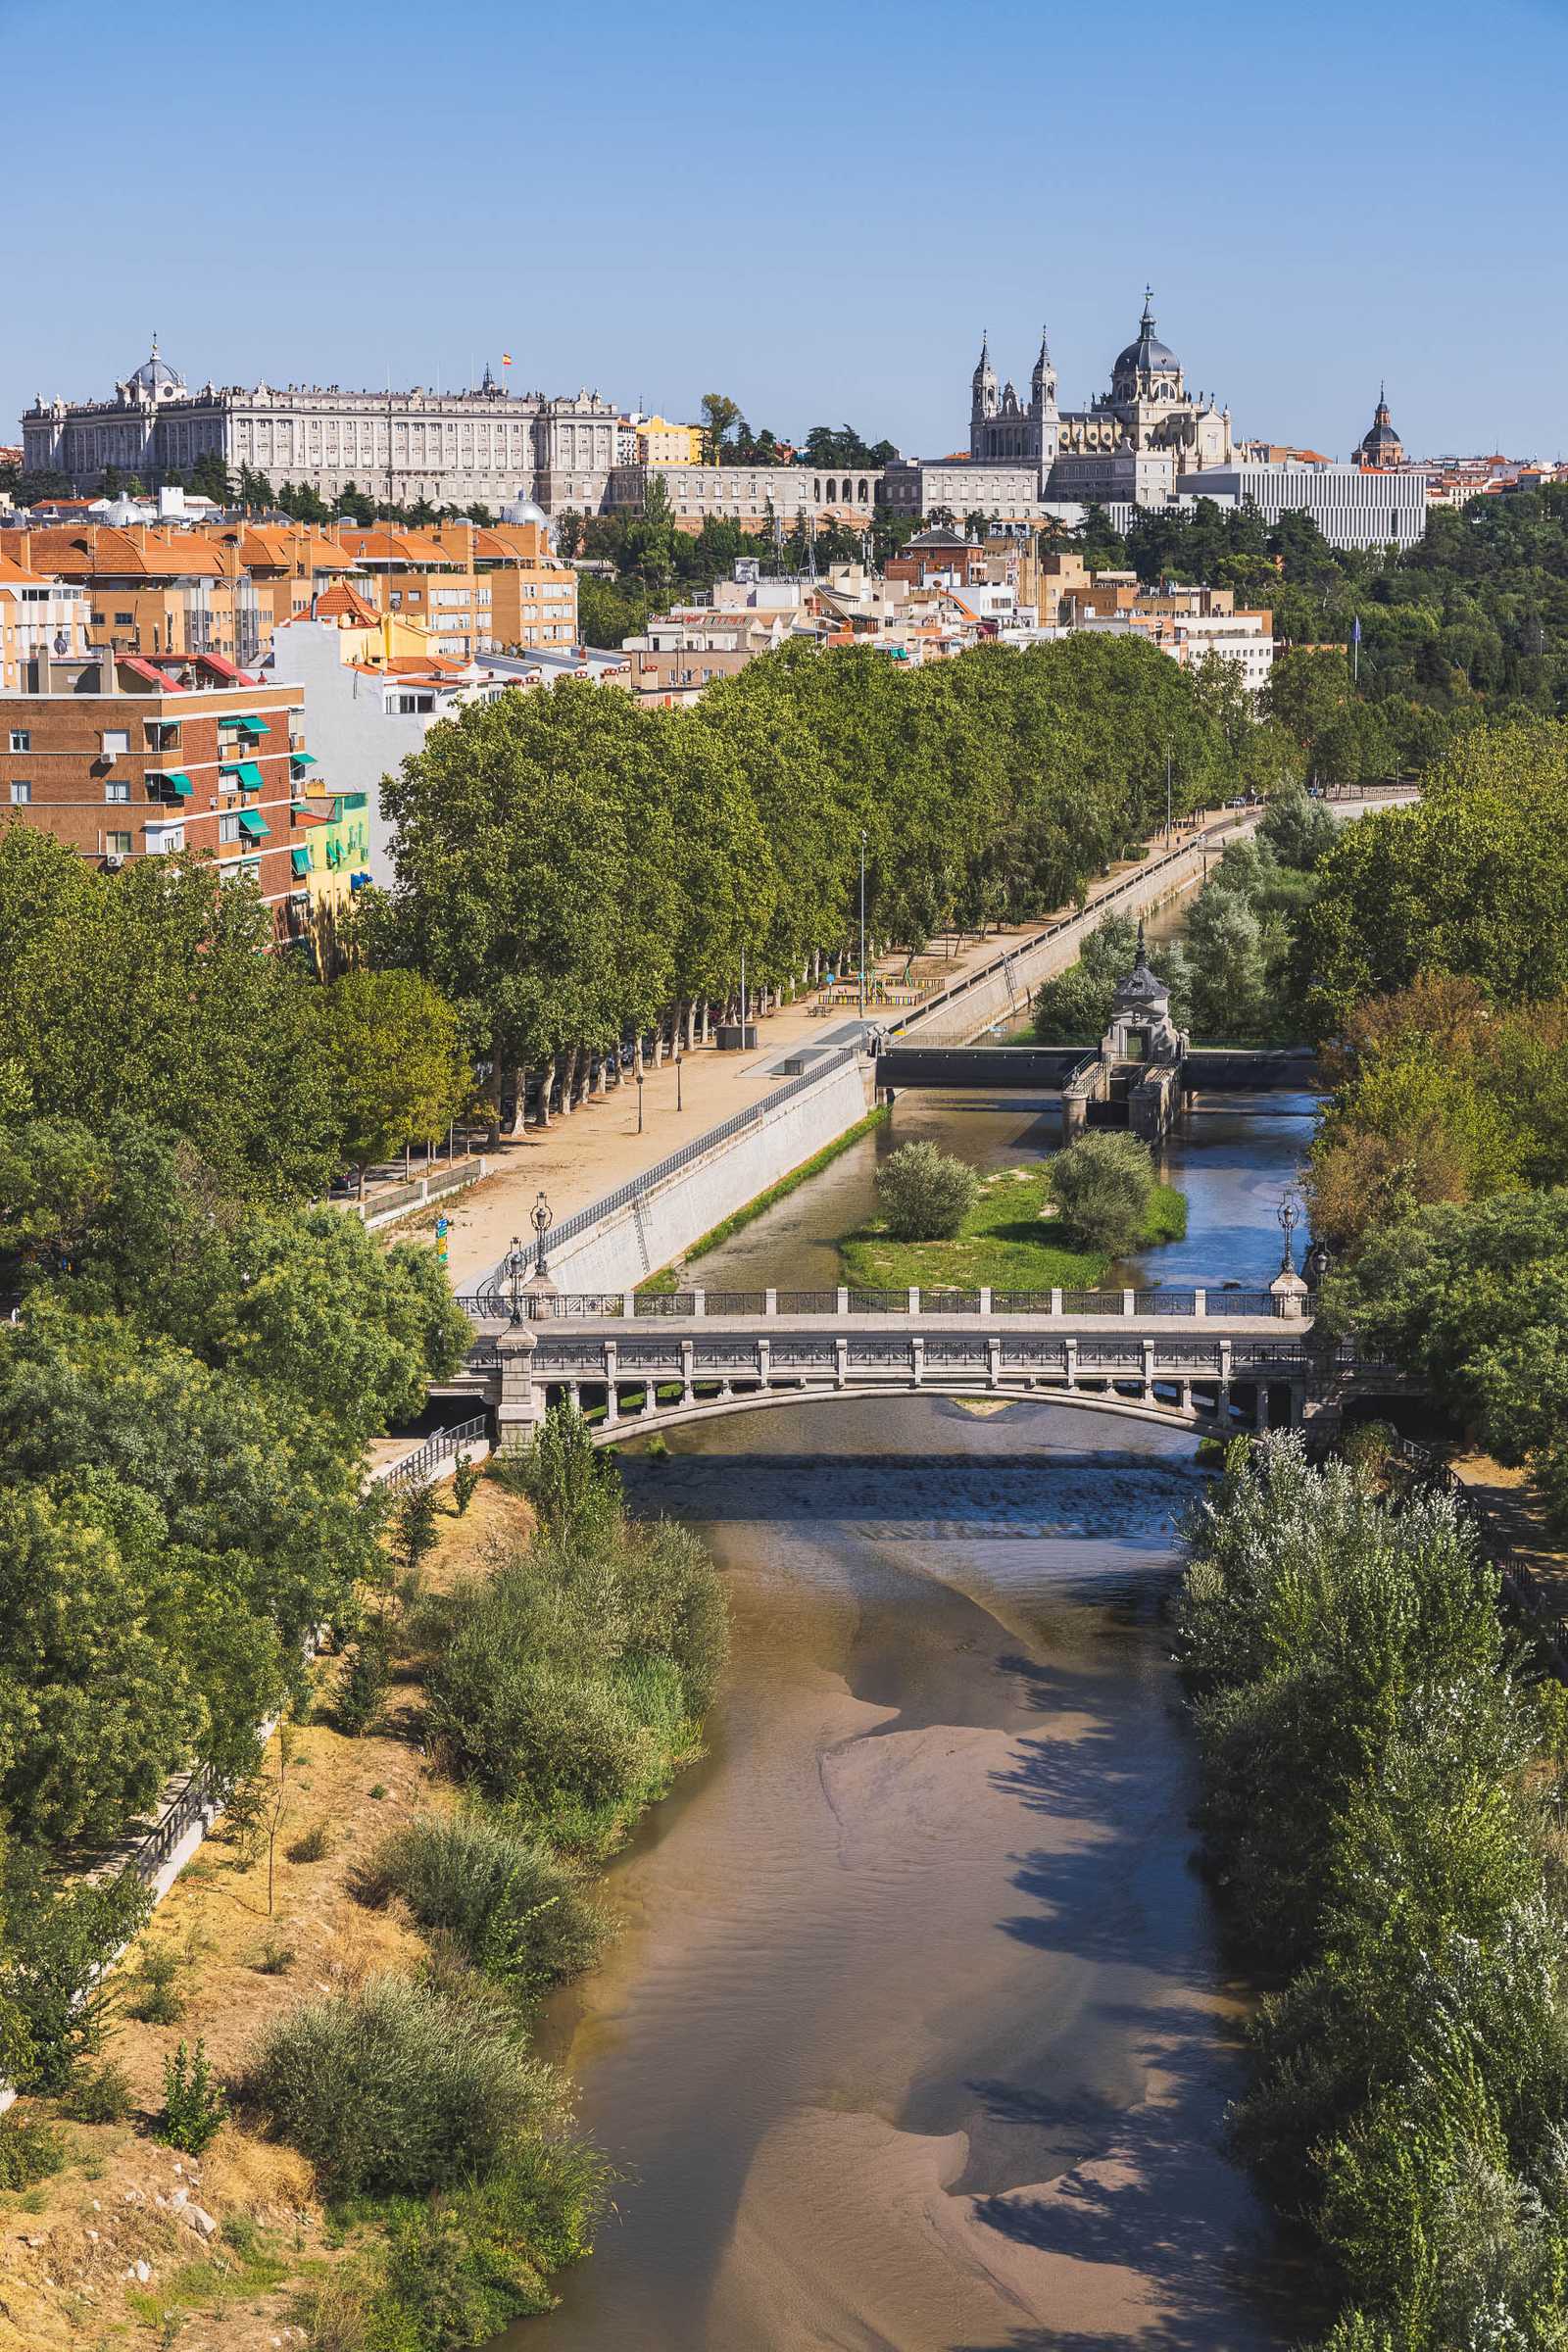 Rio Manzanares flowing in the valley below Madrid and the Royal Palace